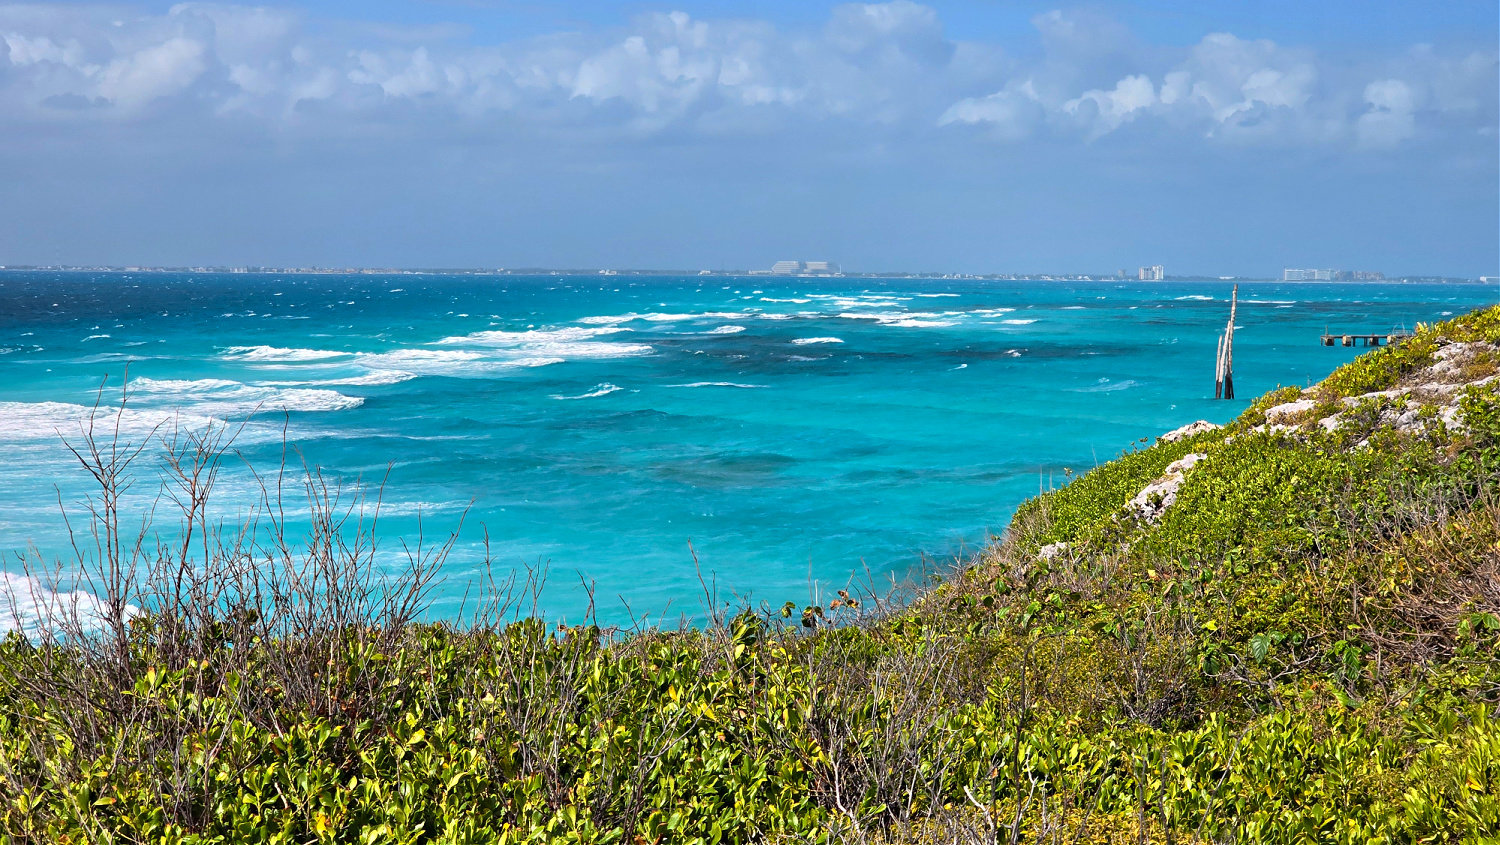 a view of Cancun from Isla Mujeres